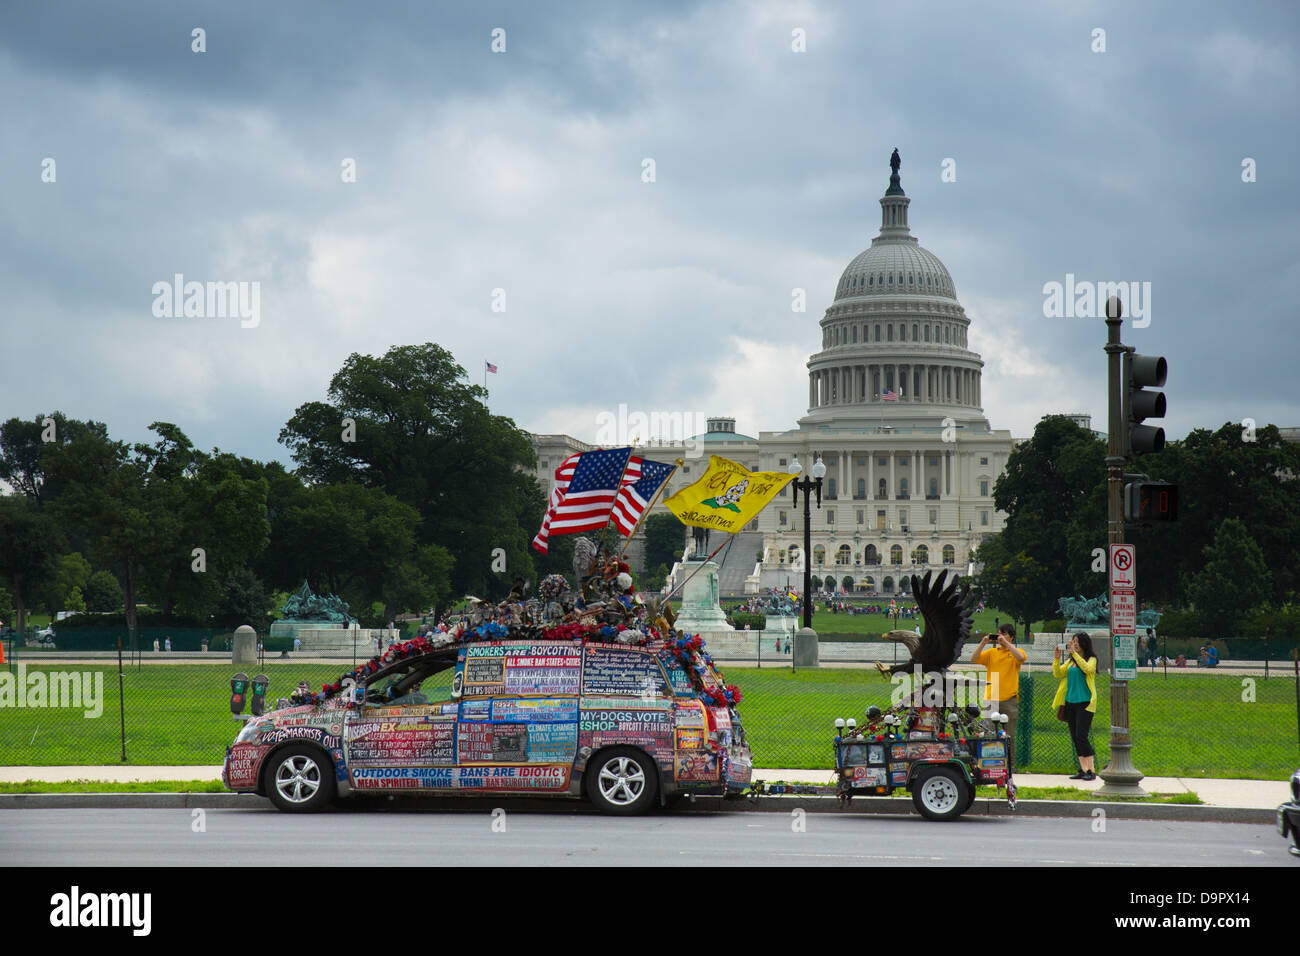 Tourists take photos of van covered in political messages in front of US Capitol building, Washington D.C., USA Stock Photo